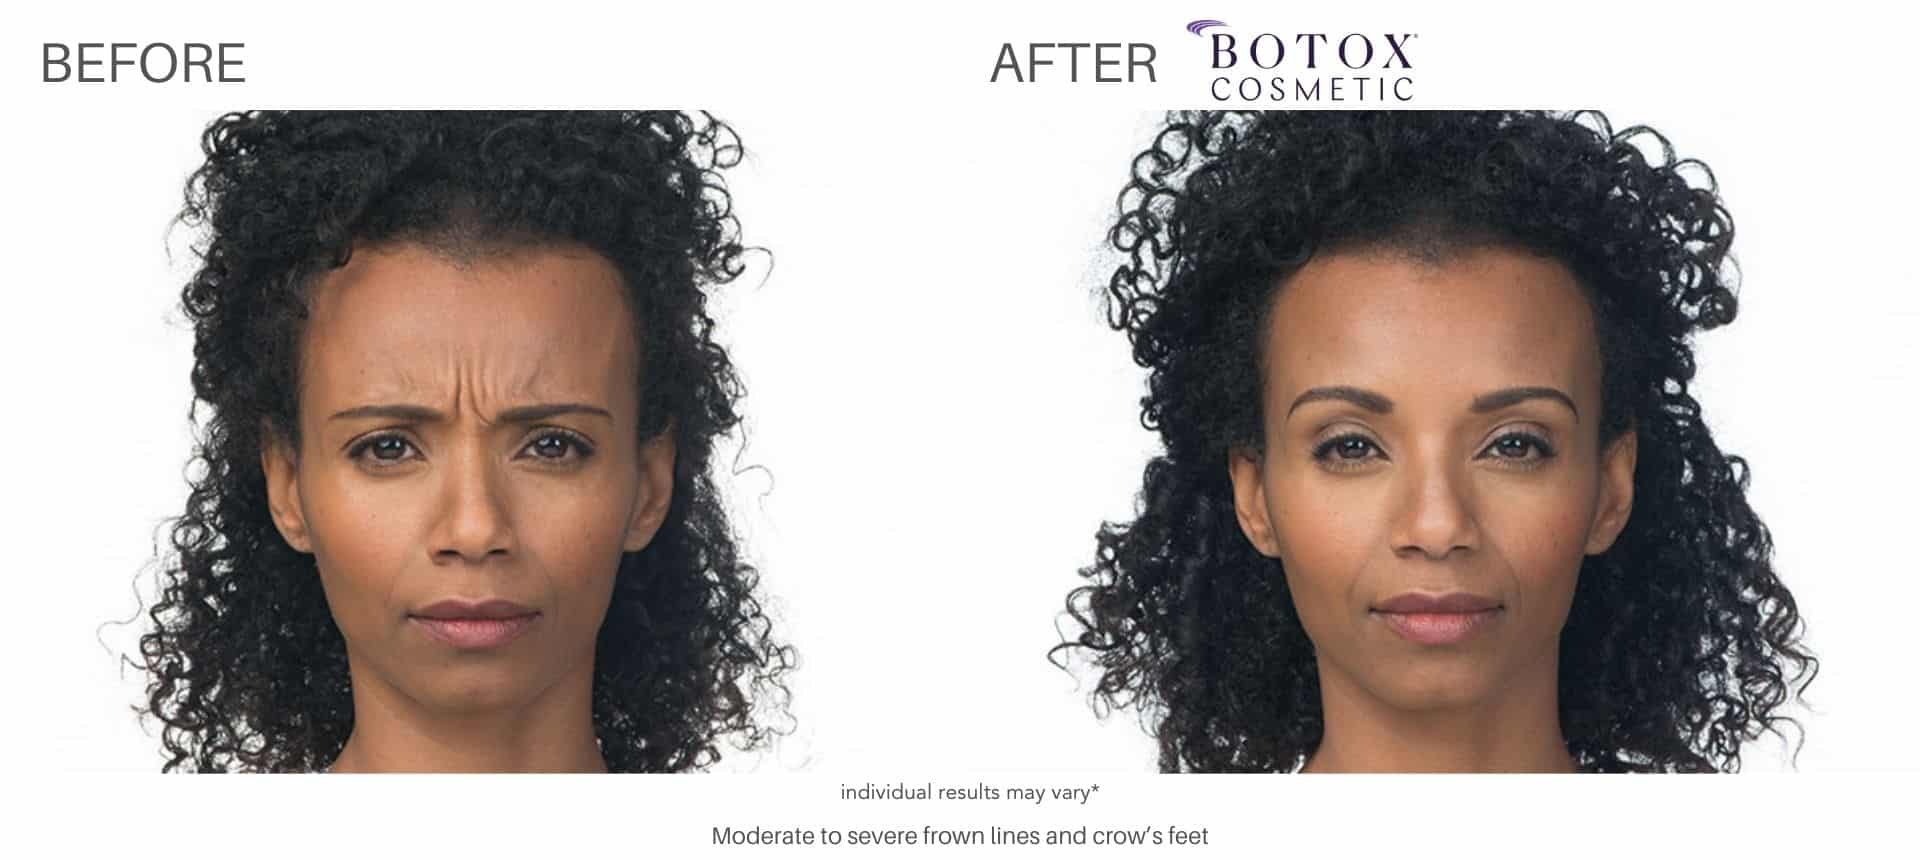 Woman's before and after pictures from botox